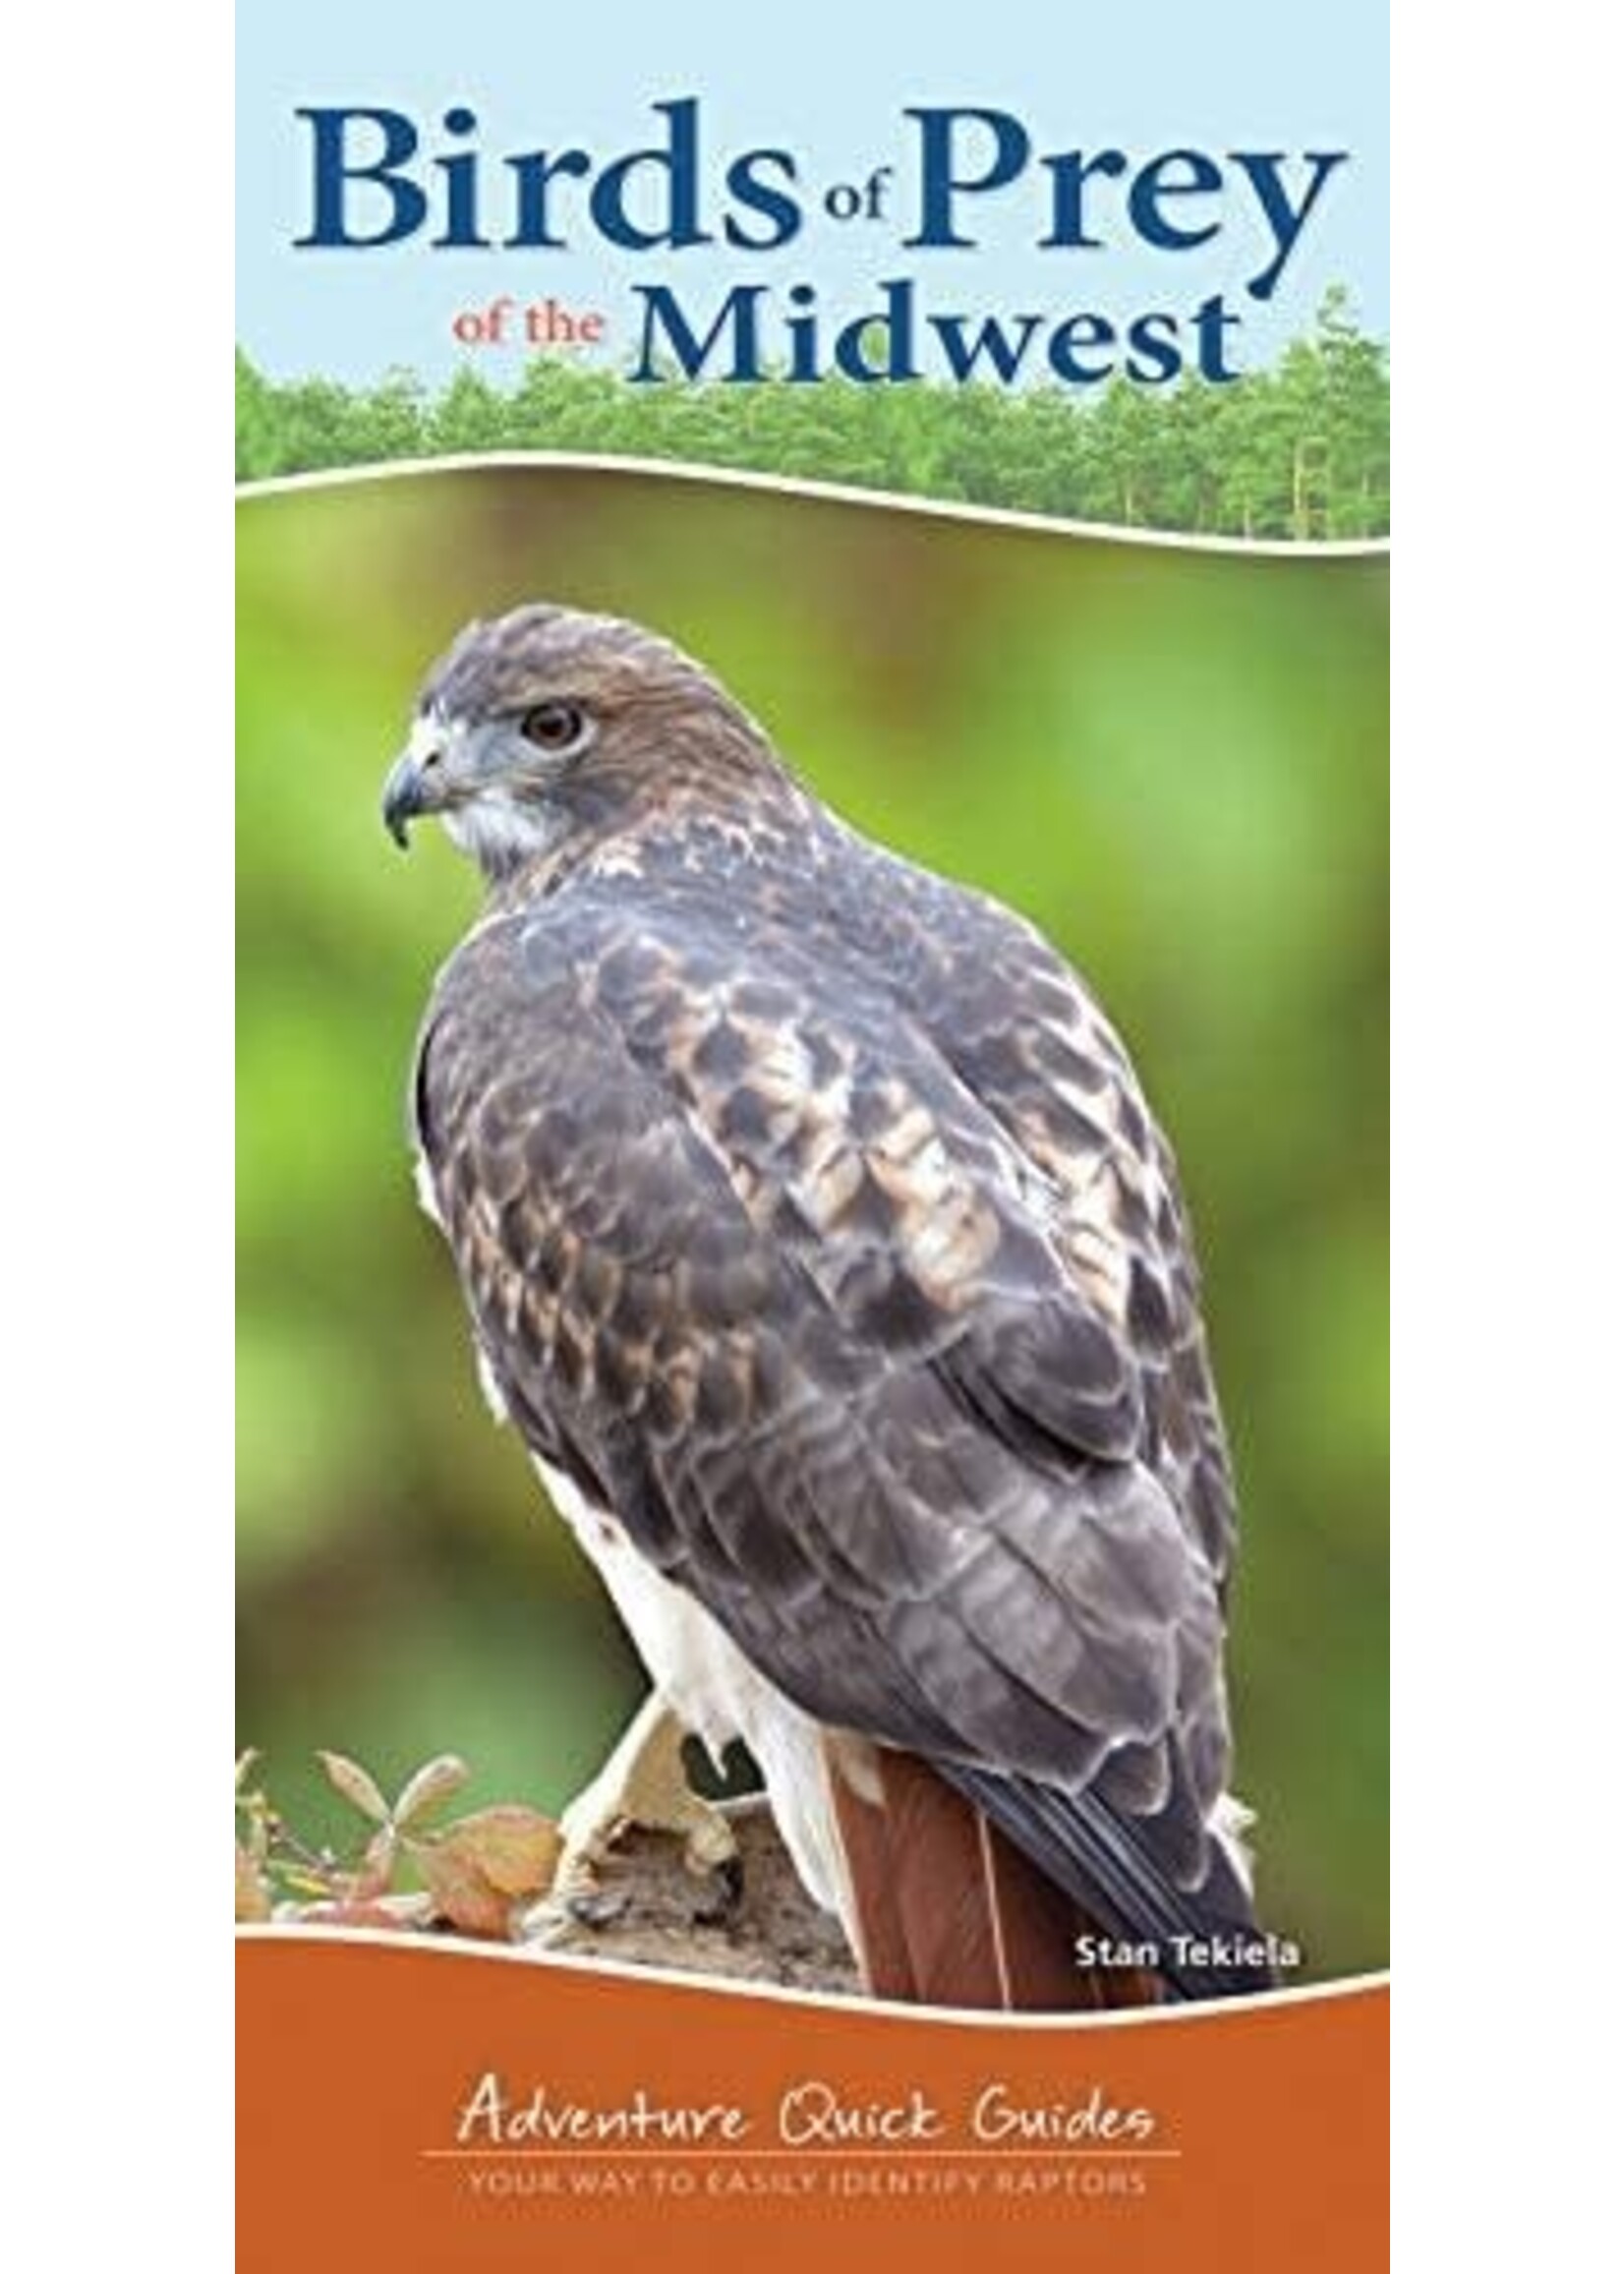 Birds of Prey of the Midwest: Adventure Quick Guide